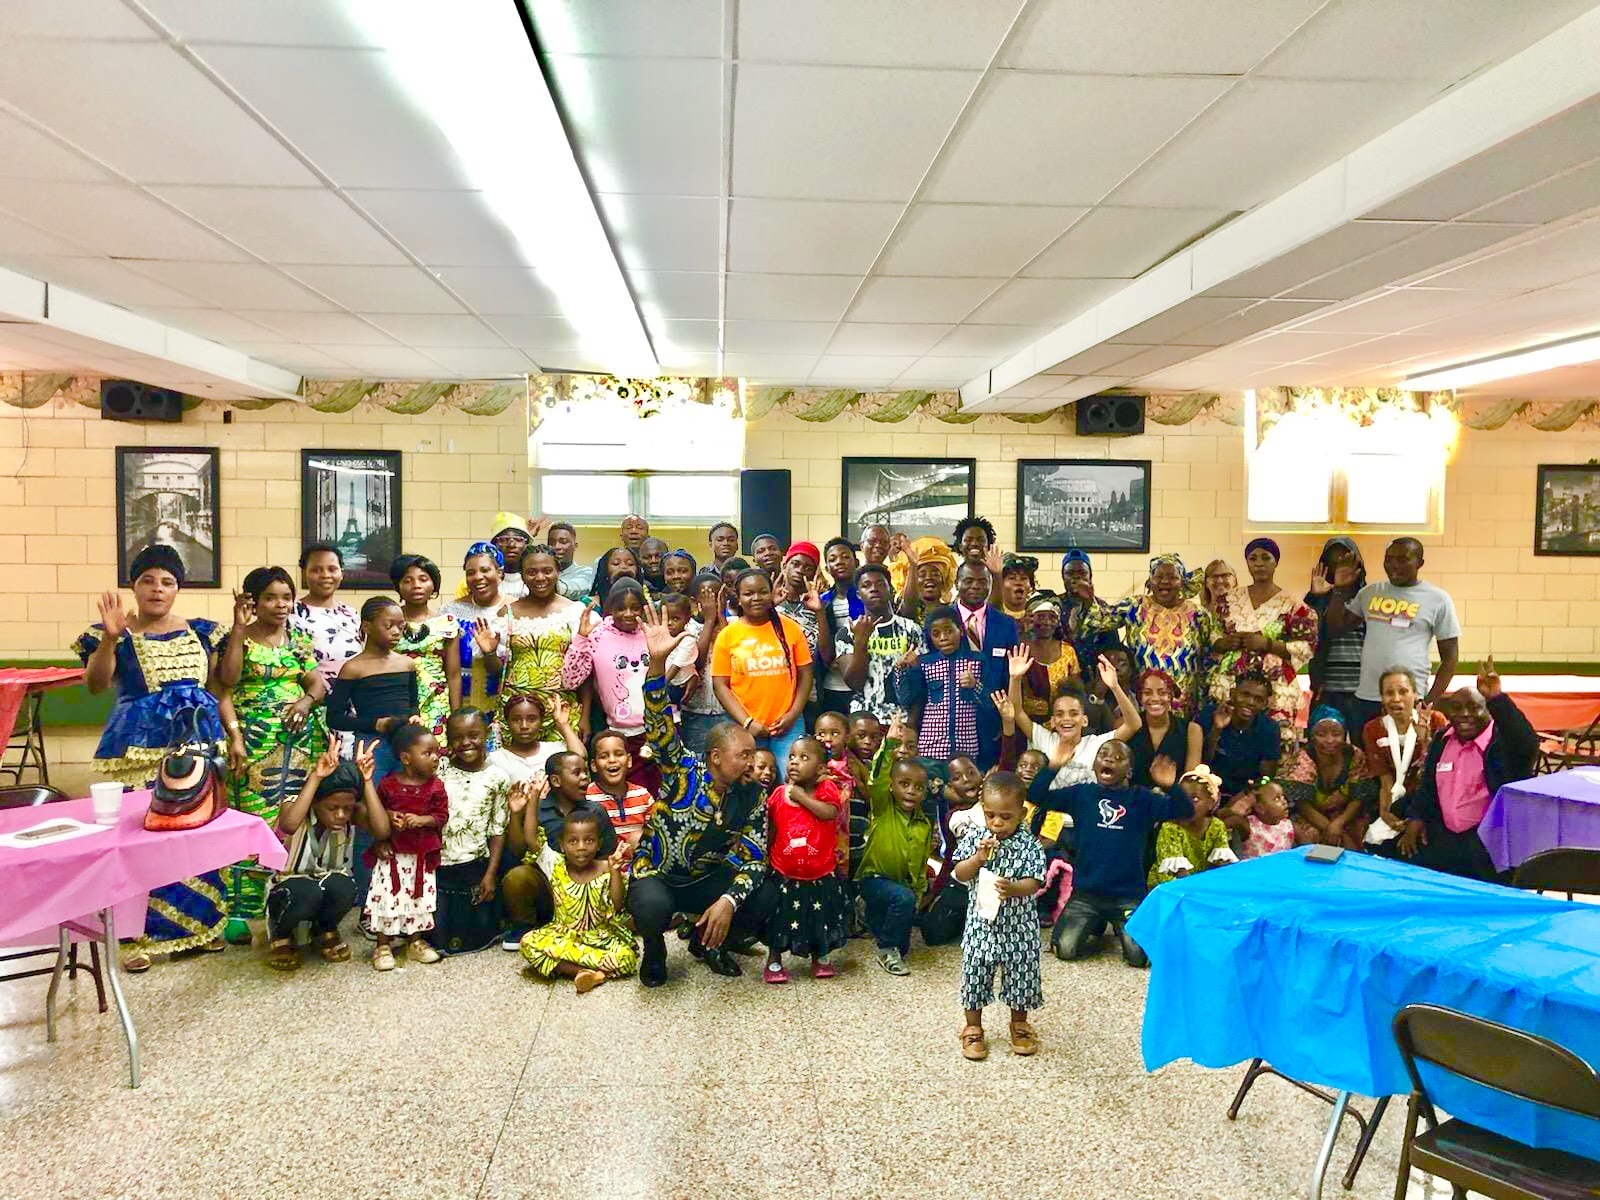 The ‘marafiki’ and friends: Conference brings together Congolese community from Ohio and Indiana